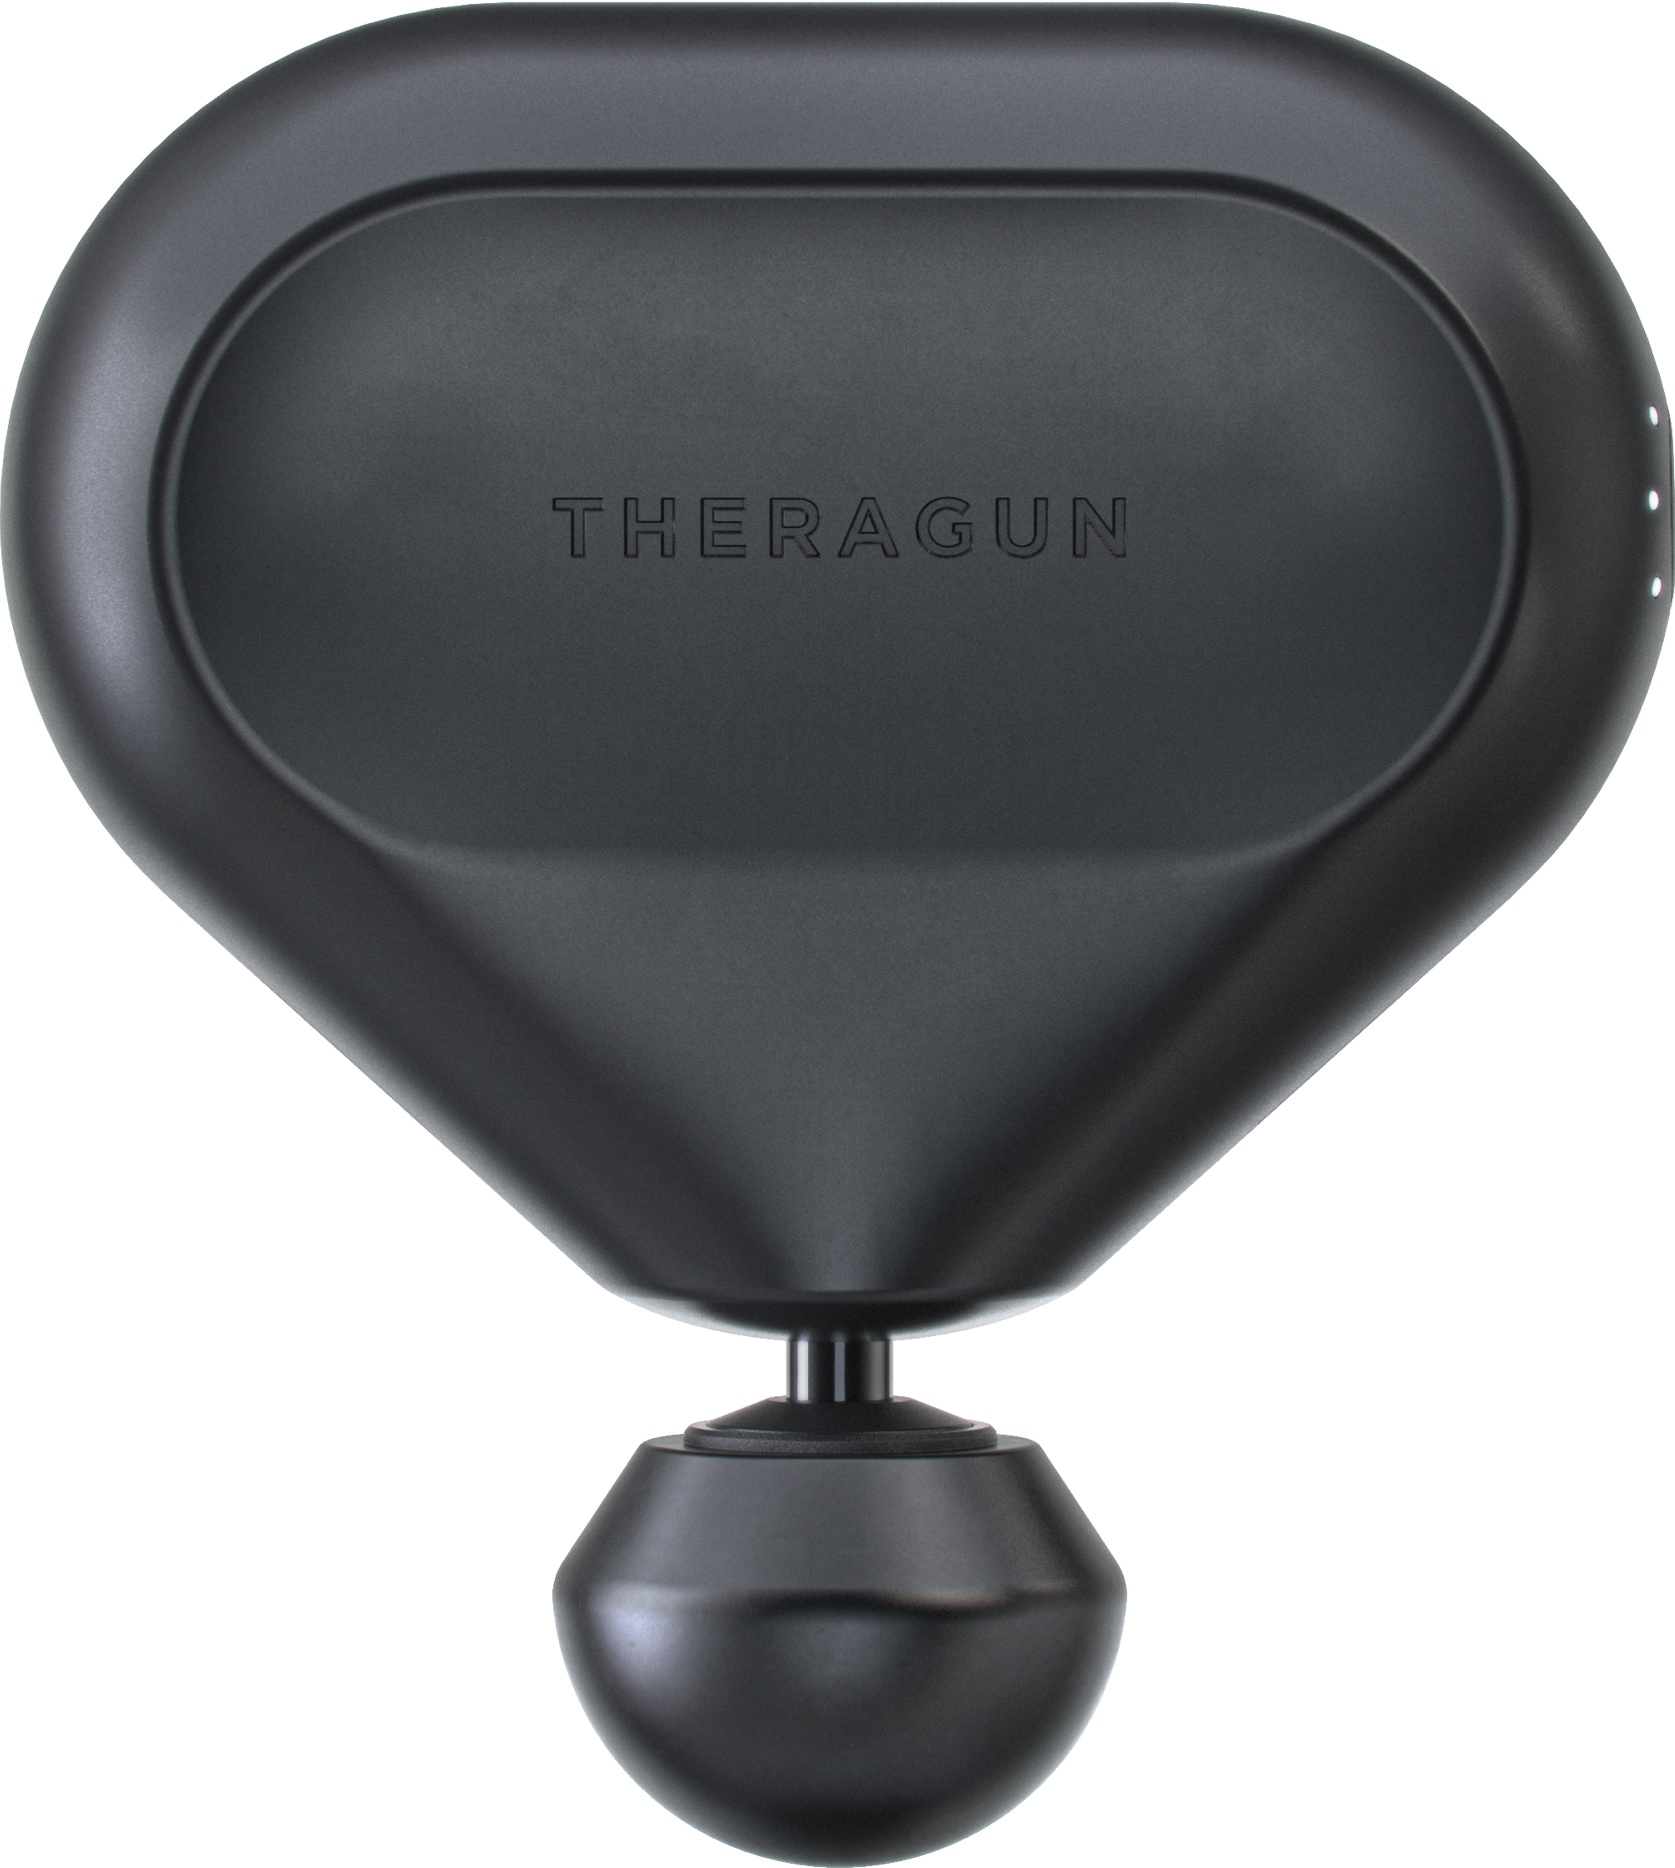 10: Theragun Mini 4th Gen Percussive Therapy Massager by Therabody